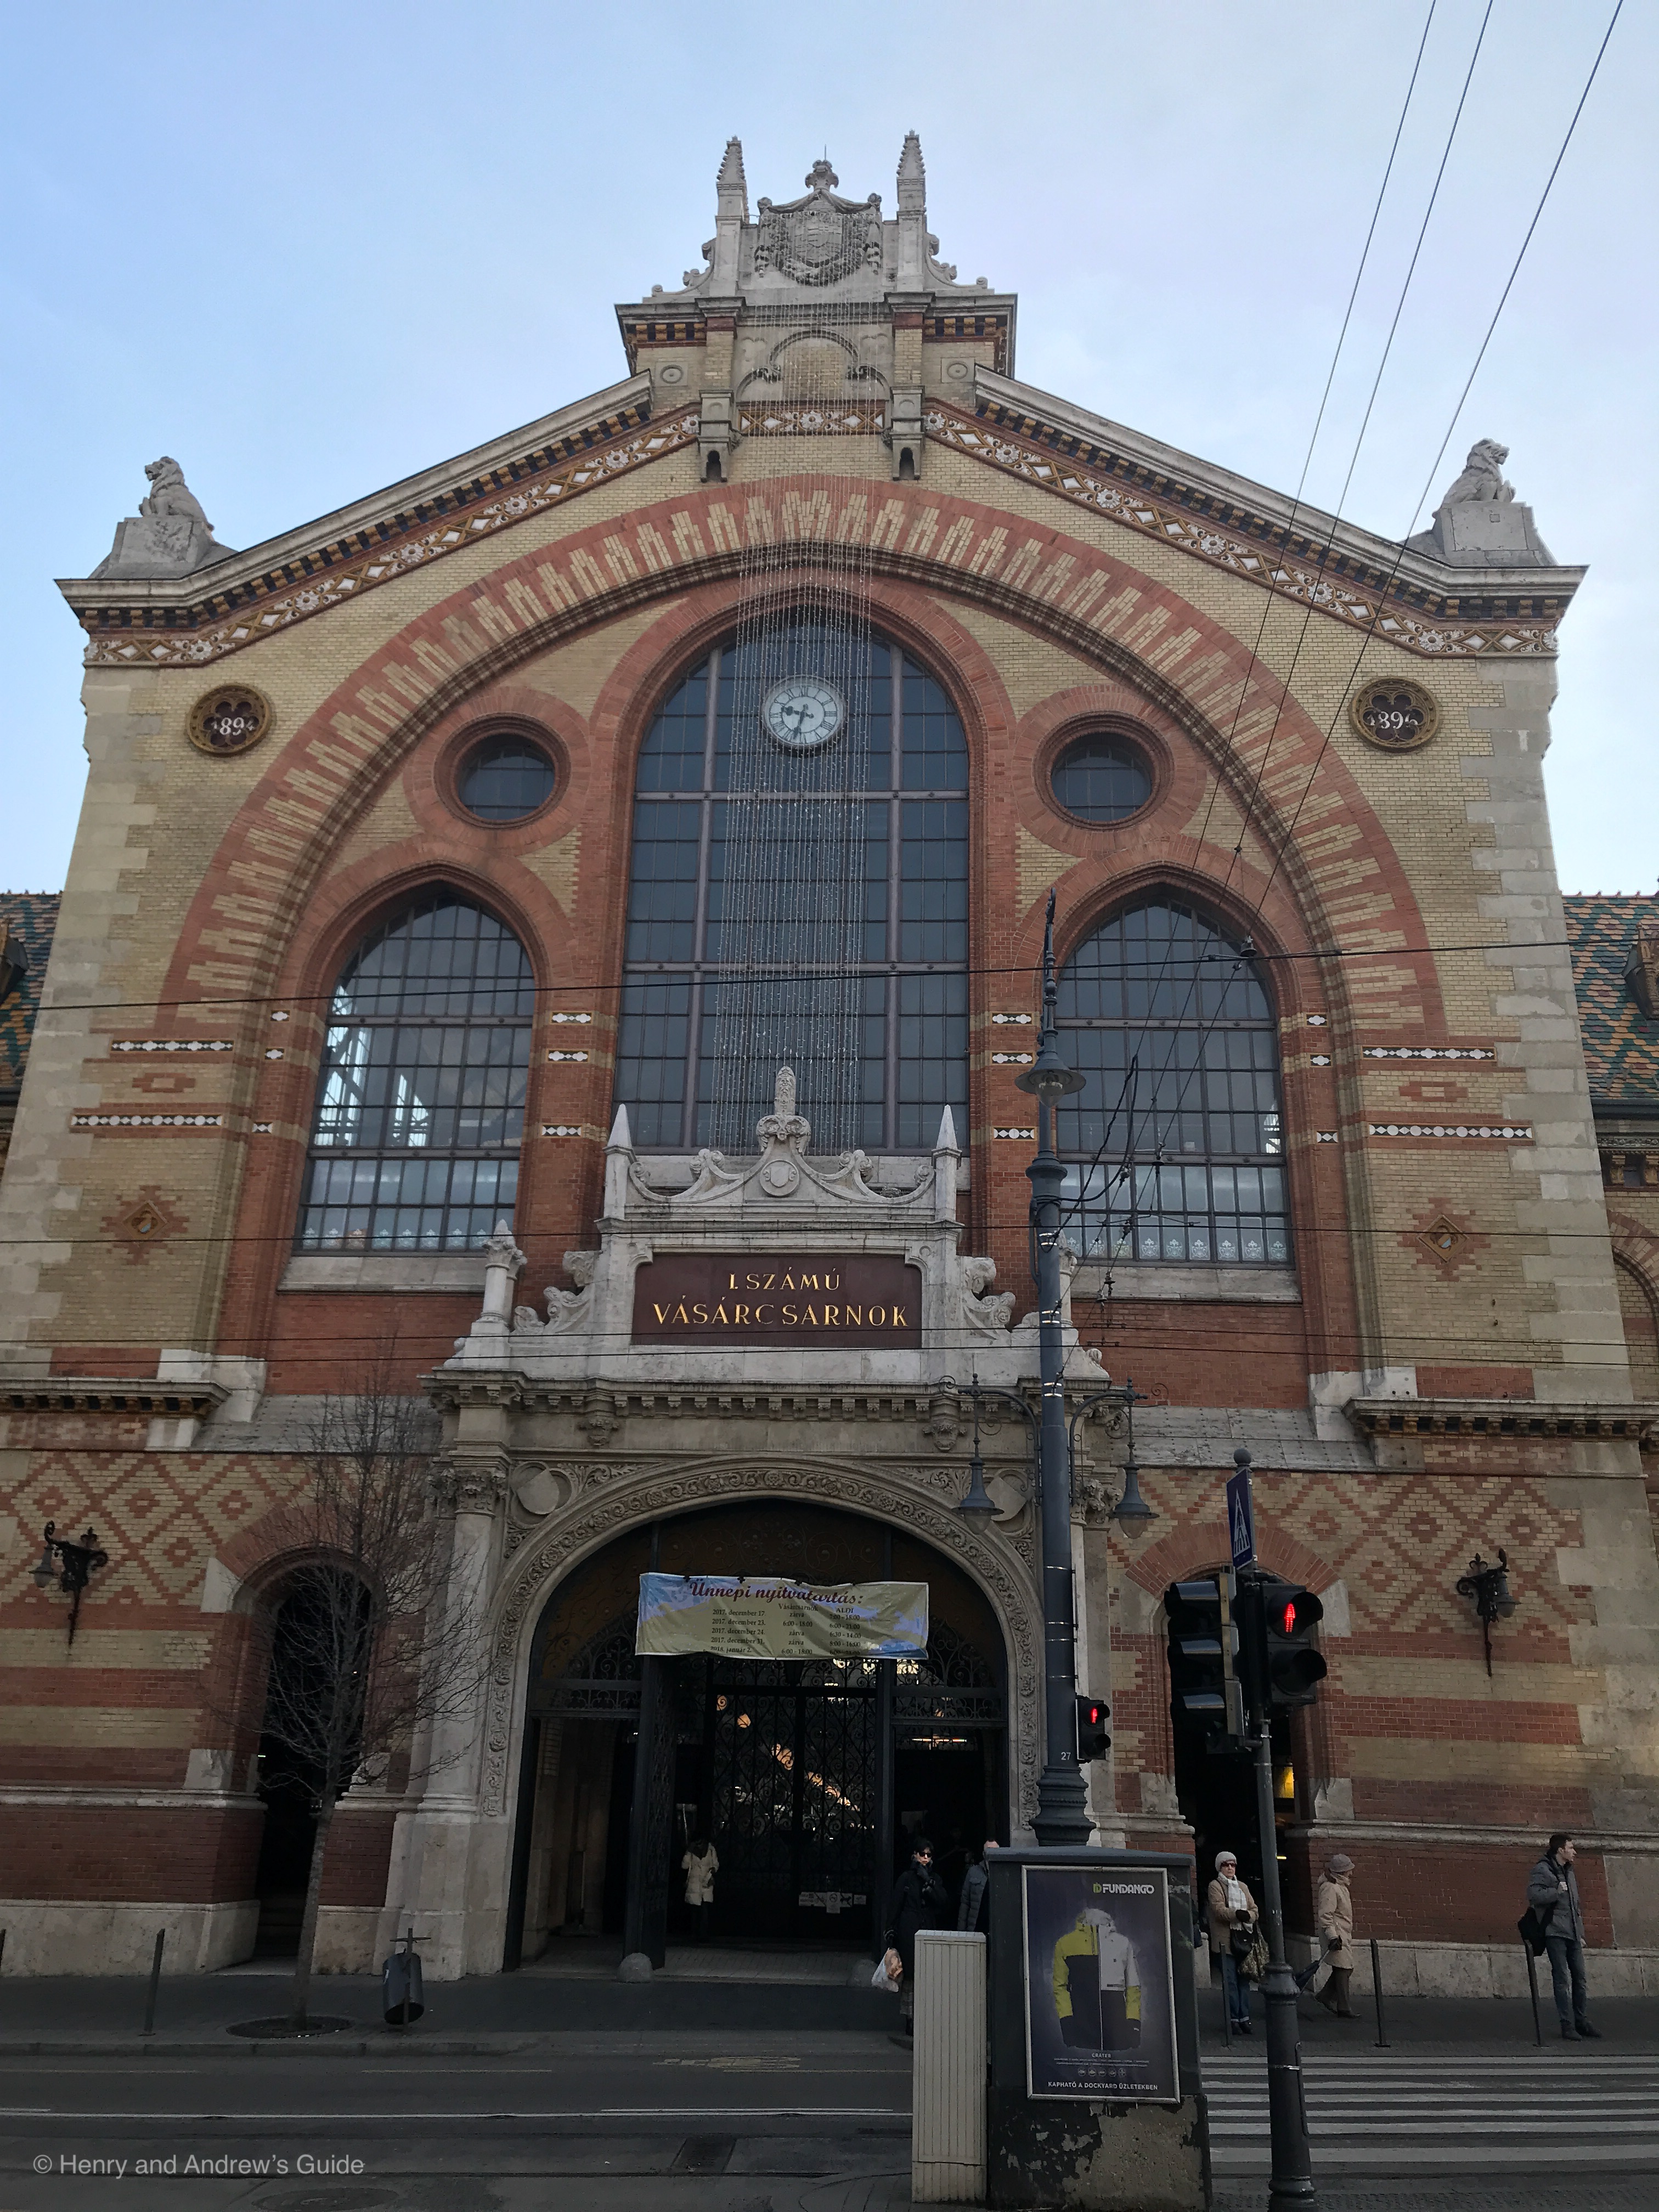 The entrance of the Grand Central Market in Budapest